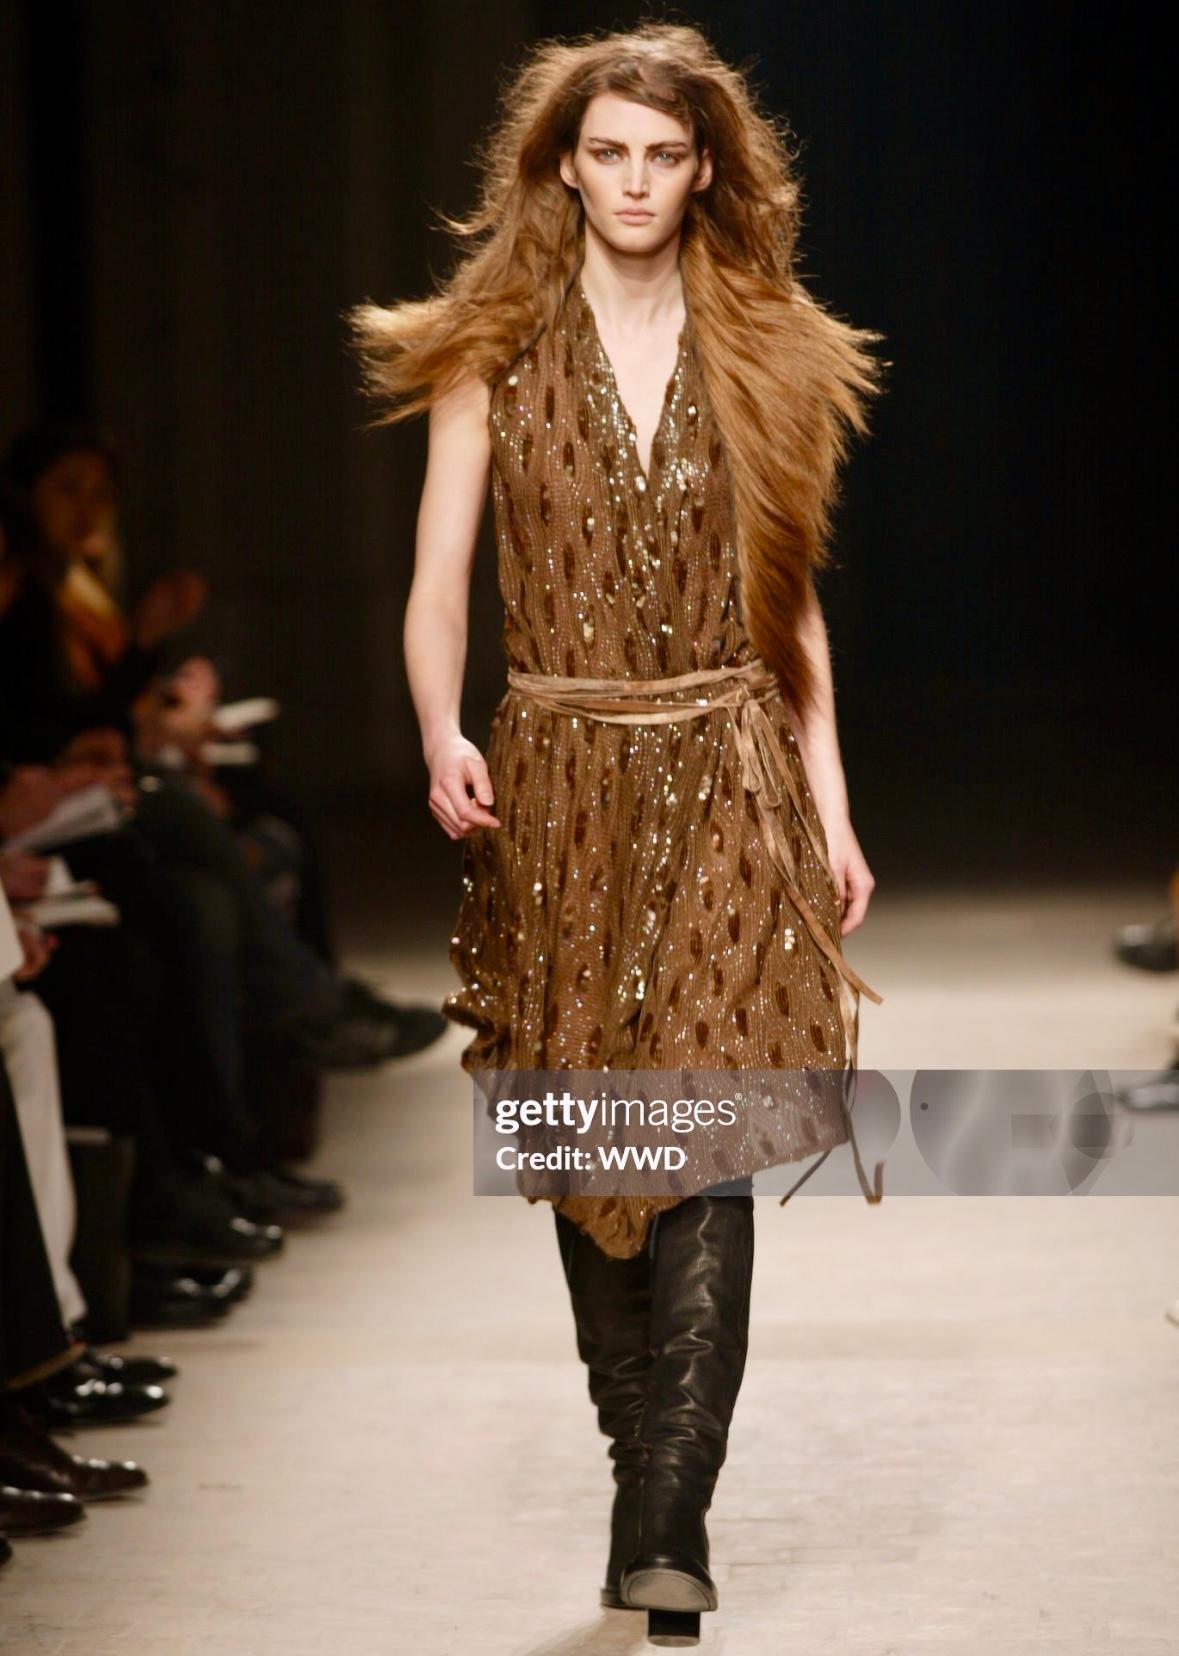 From the Fall/Winter 2002 collection, this Ann Demeulemeester mini dress is covered in grey metallic sequins in an abstract pattern and features thin black straps. A brown variation of this eye-catching dress debuted as part of look 21 on Vivien